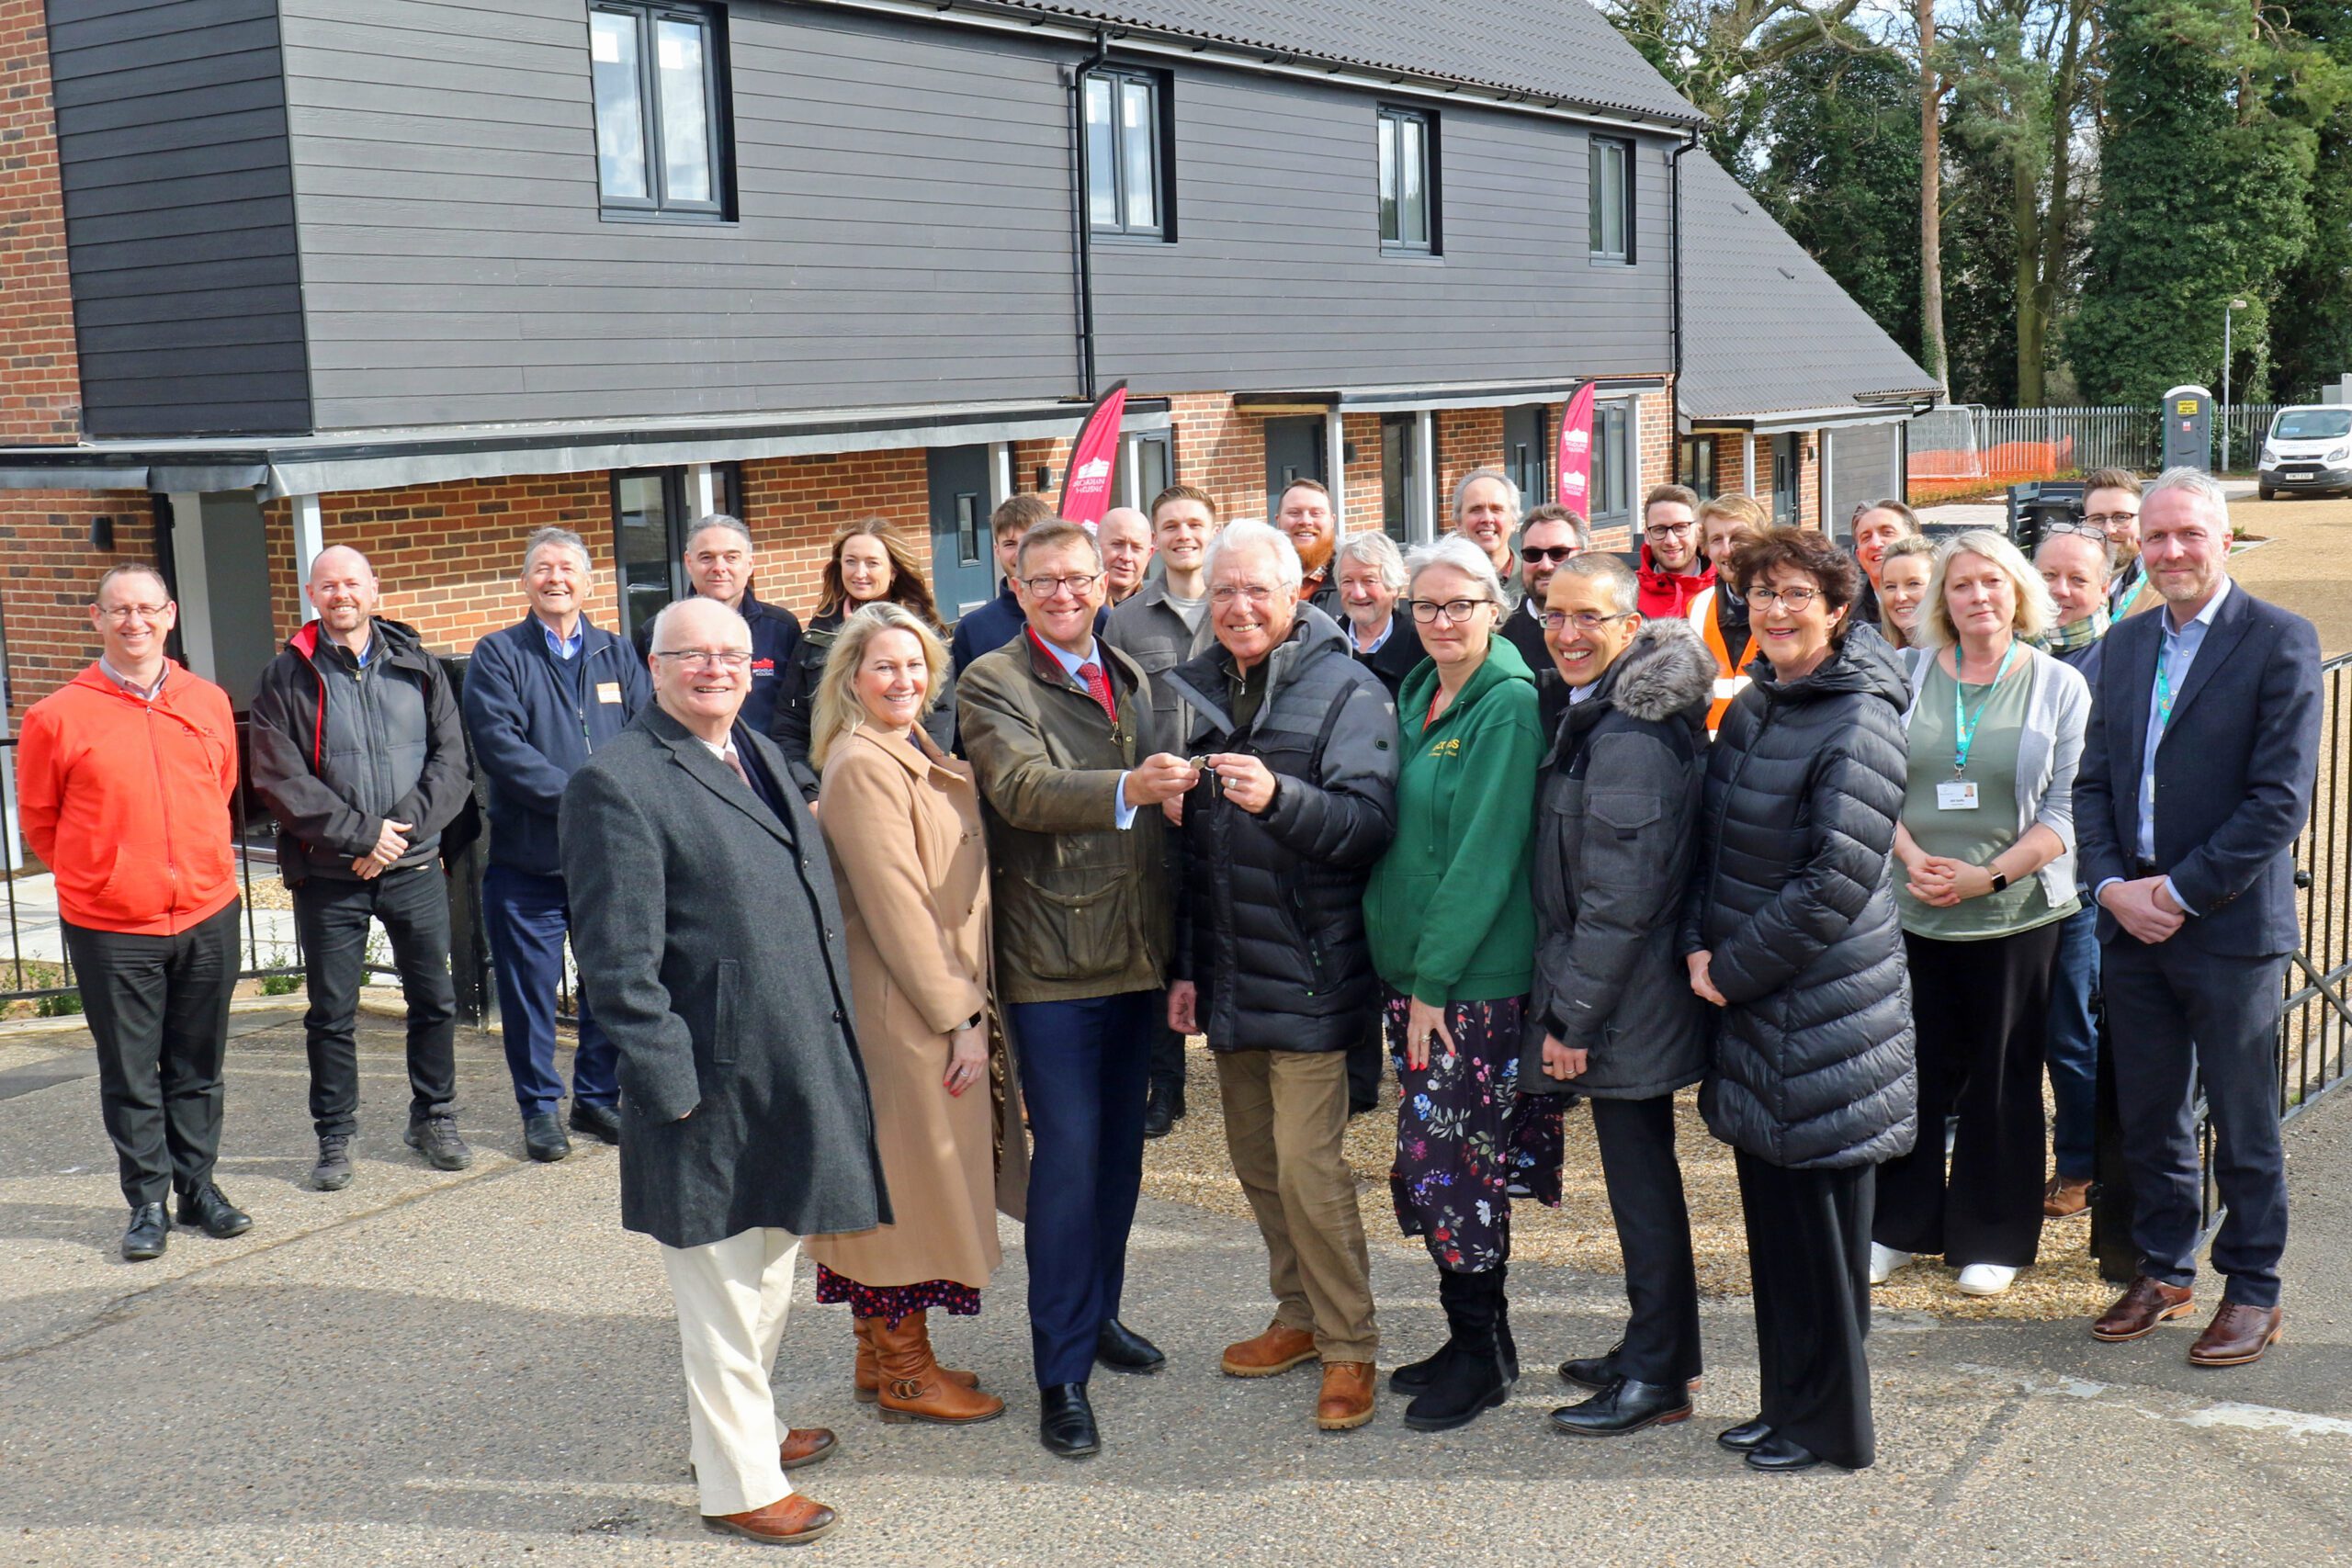 Members of Breckland District Council and Broadland Housing accepting keys to the new homes with people in backbround